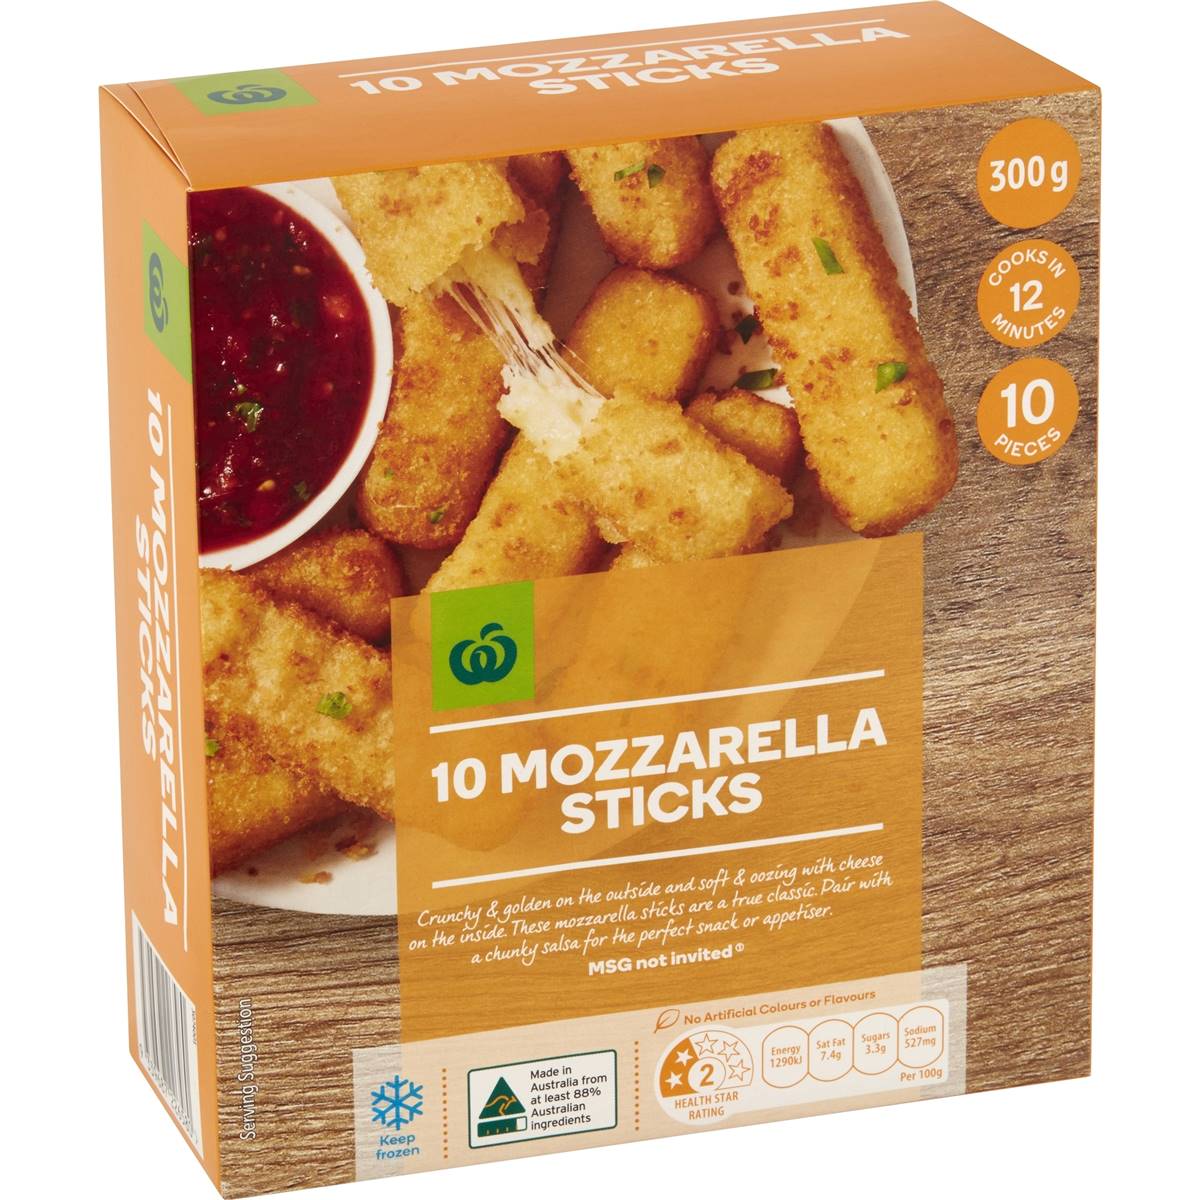 Calories in Woolworths Mozarella Sticks